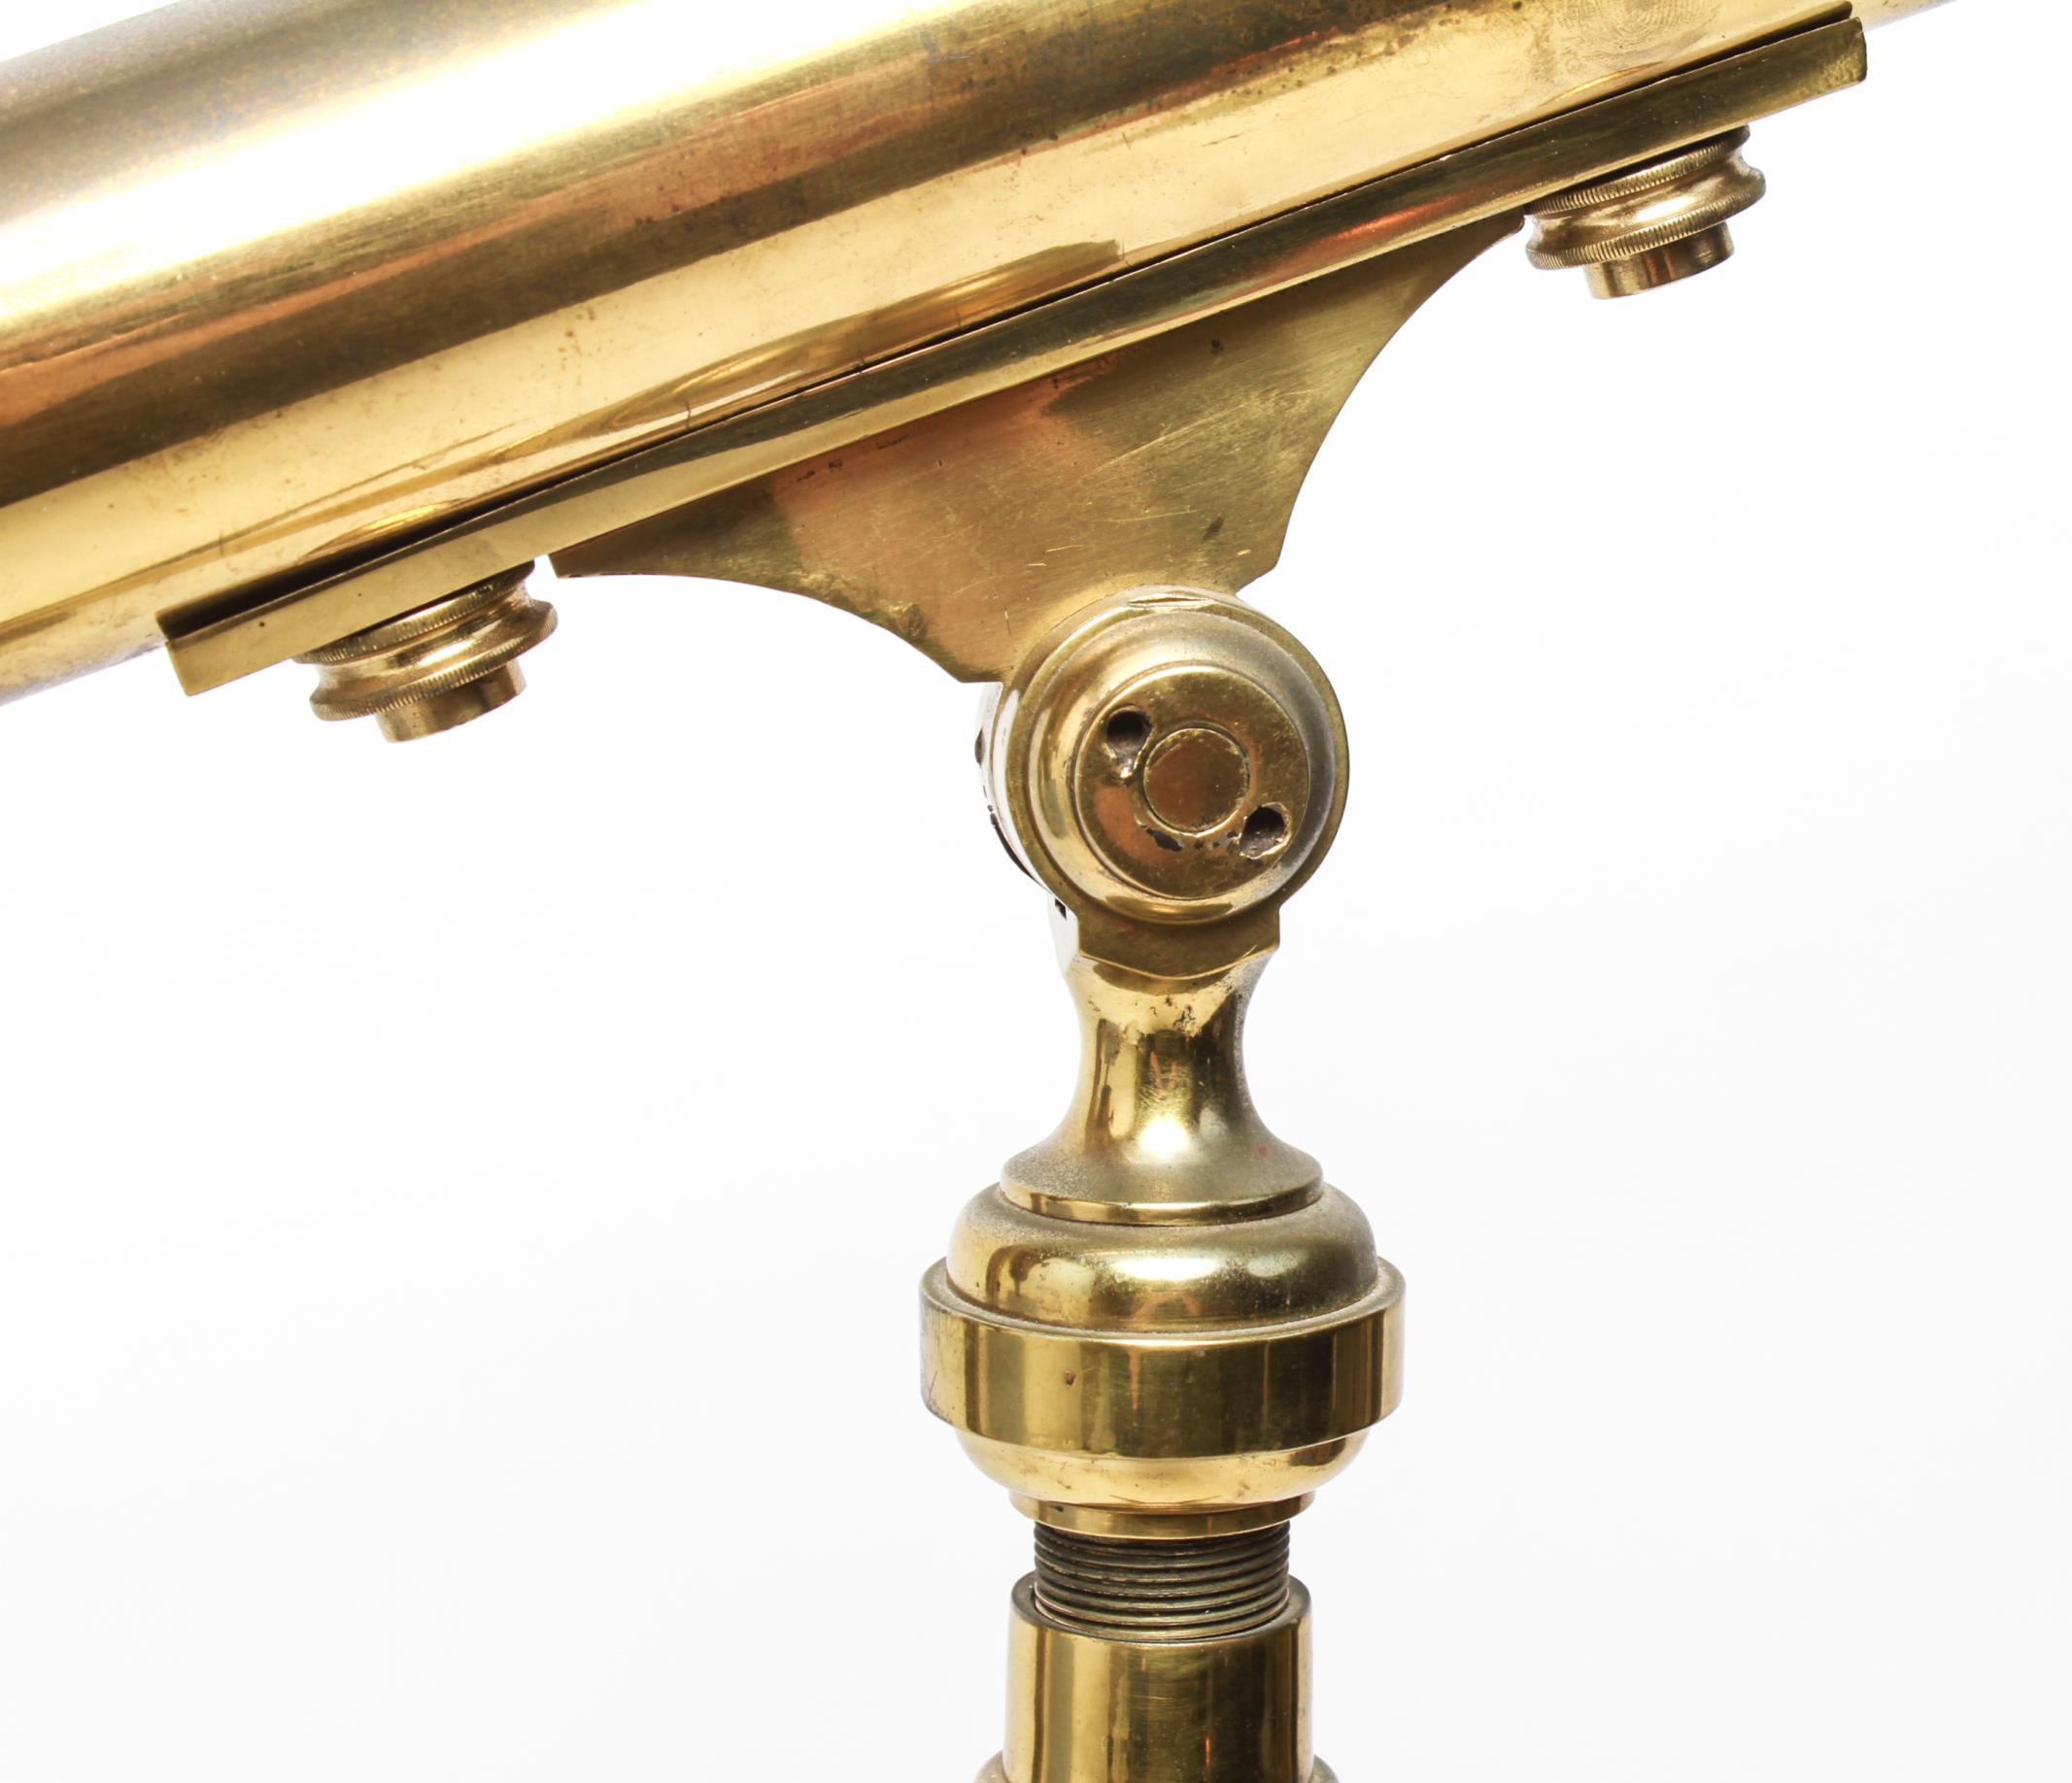 English tabletop telescope with adjustable height in solid brass, with a screw lock and standing atop folding tripod legs. The piece has some wear to the brass surfaces but is in great vintage condition.